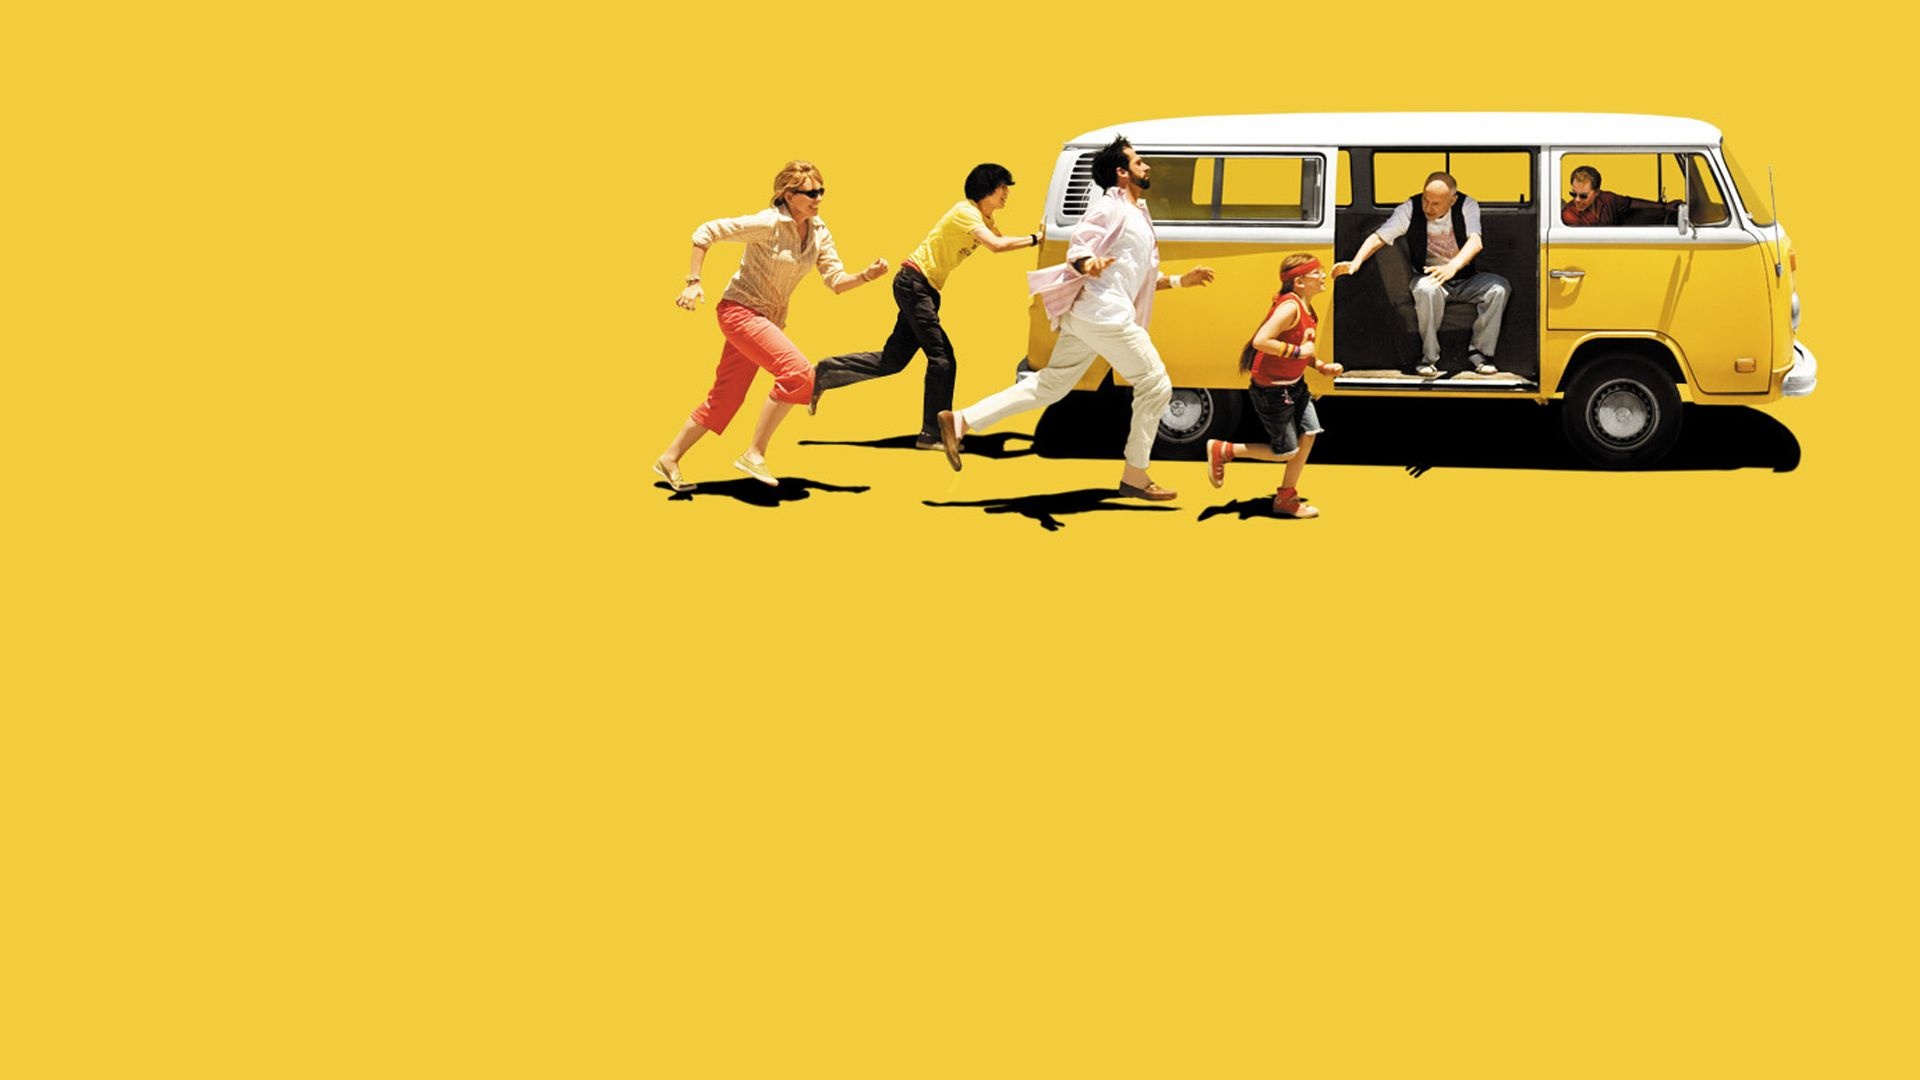 Little Miss Sunshine: Olive and her mother Sheryl, brother Dwayne, uncle Frank and grandfather. 1920x1080 Full HD Wallpaper.